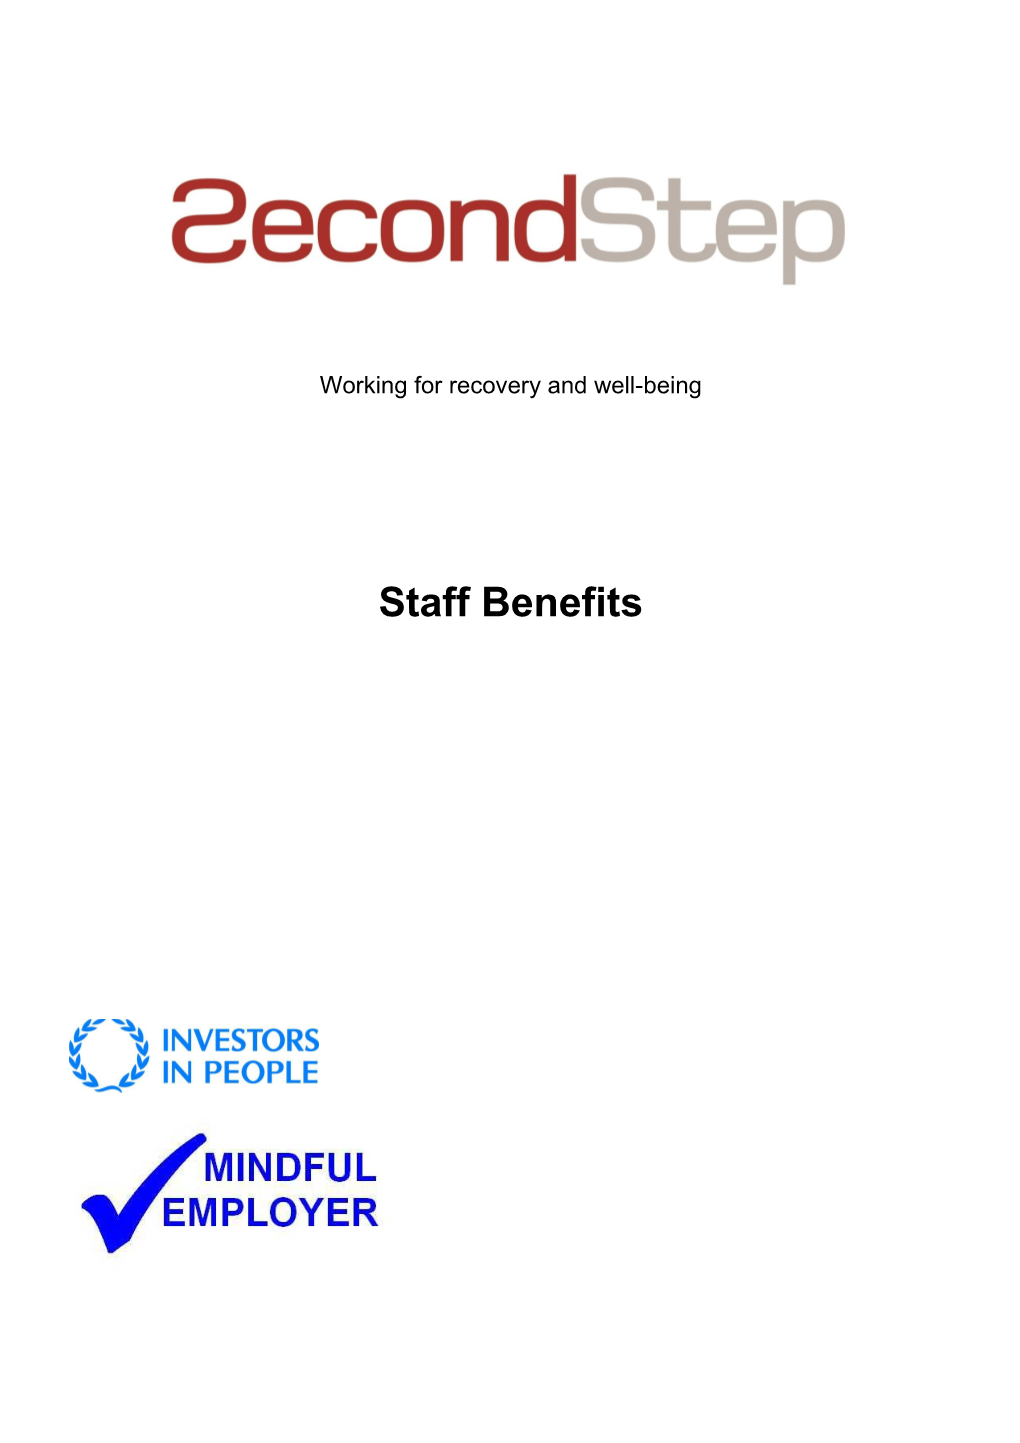 Working for Recovery and Well-Being